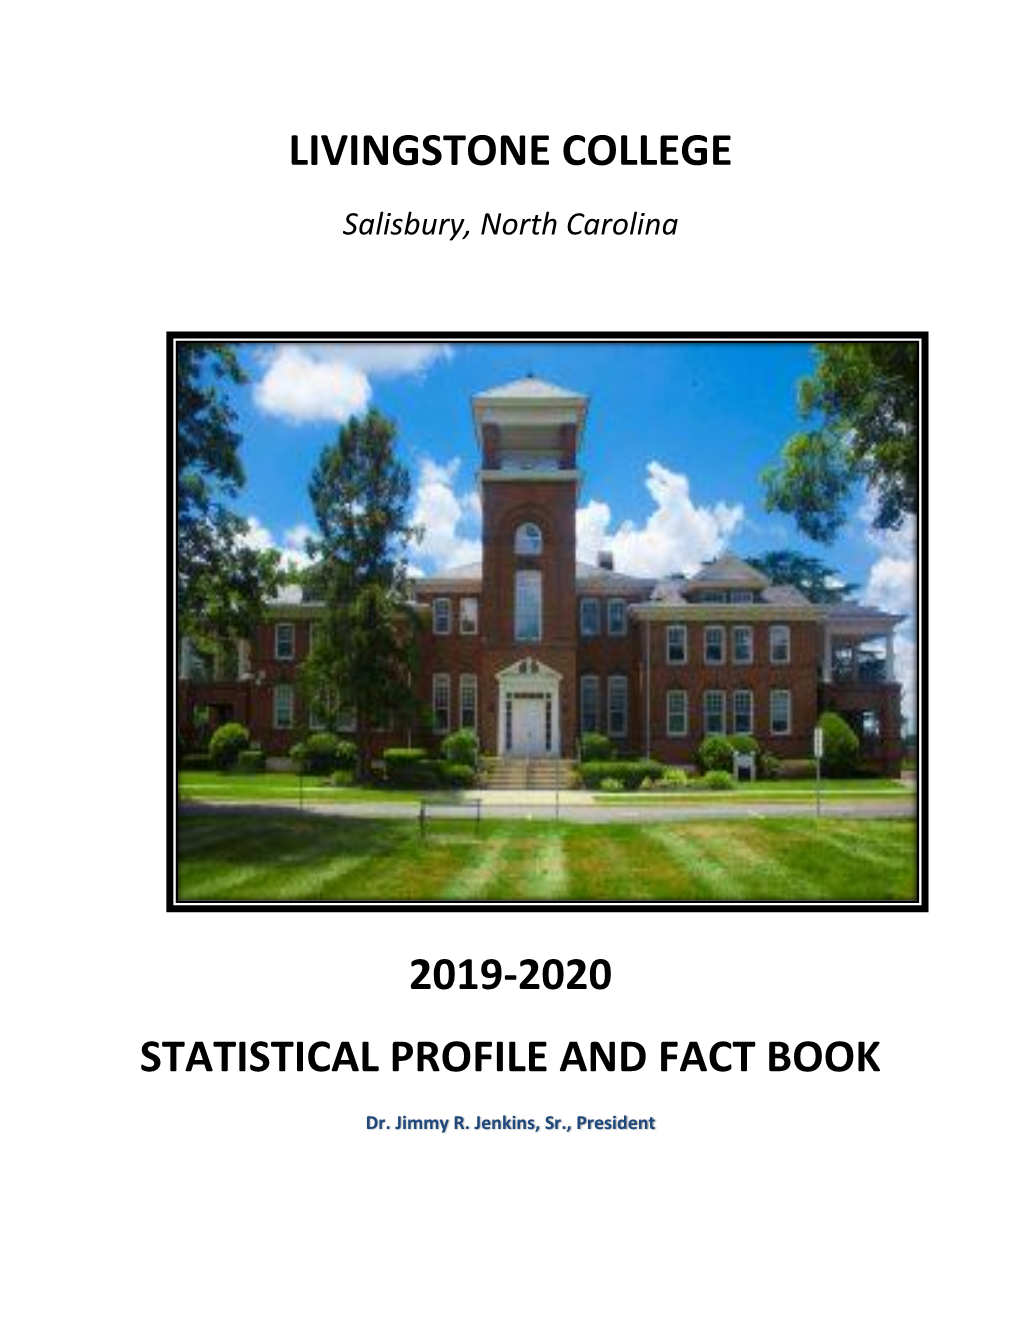 2019-2020 Statistical Profile and Fact Book